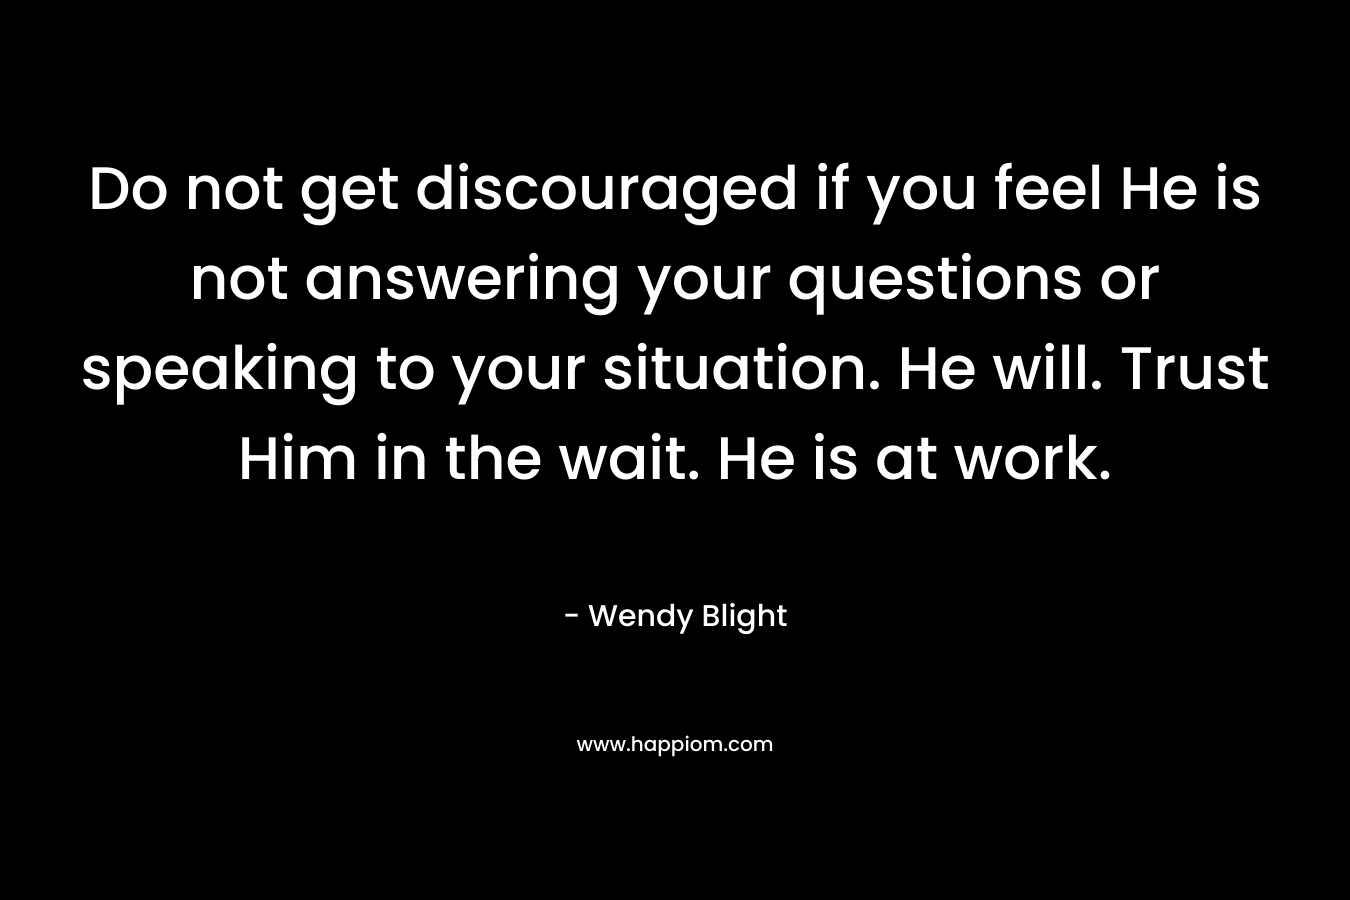 Do not get discouraged if you feel He is not answering your questions or speaking to your situation. He will. Trust Him in the wait. He is at work. – Wendy Blight